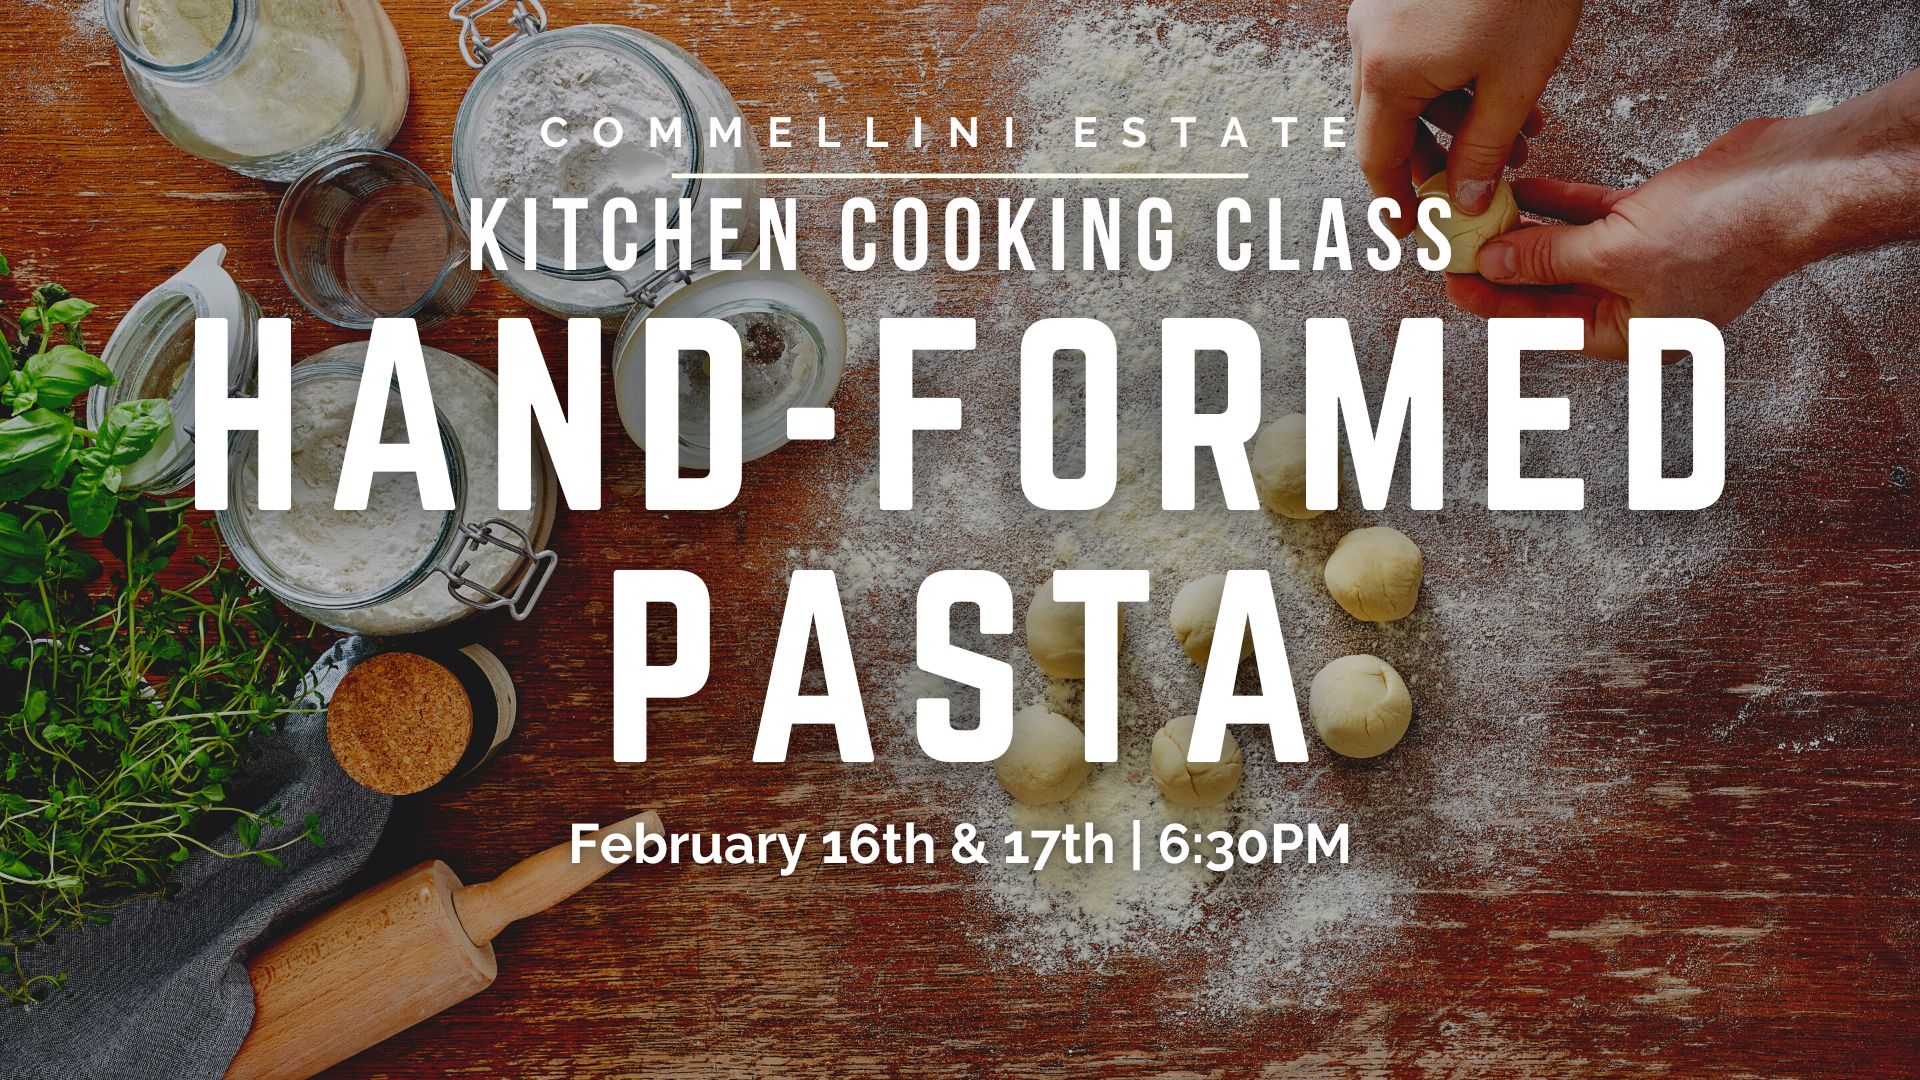 2.16 & 2.17 Kitchen Cooking Class: Hand-Formed Pasta